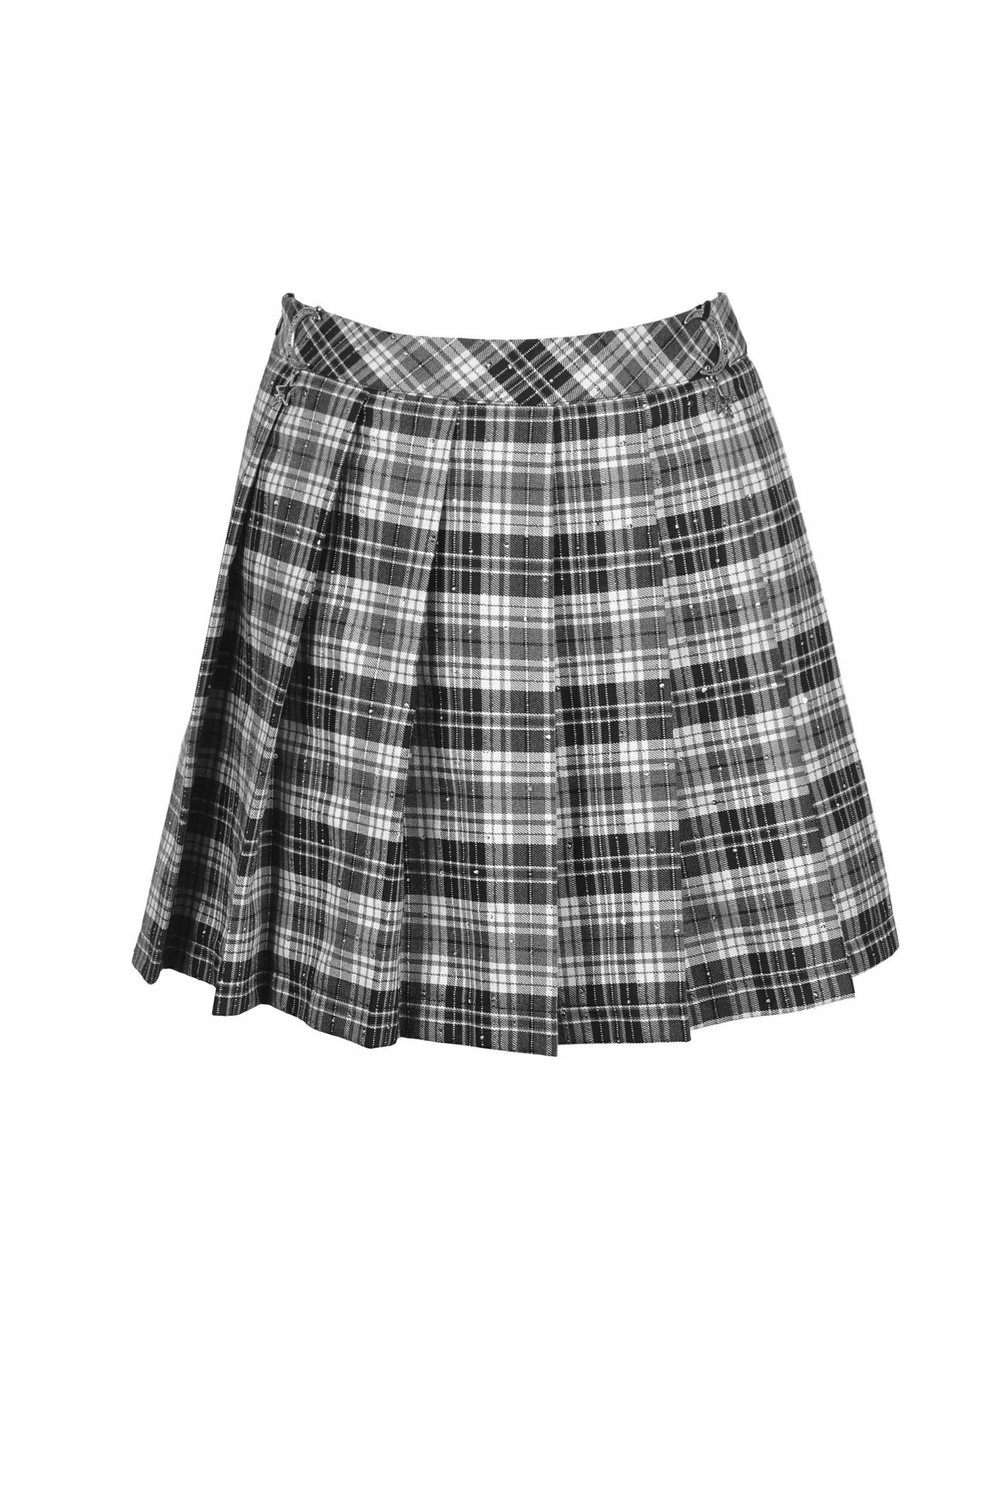 Pleated Gothic Mini Skirt with Black and White Plaid